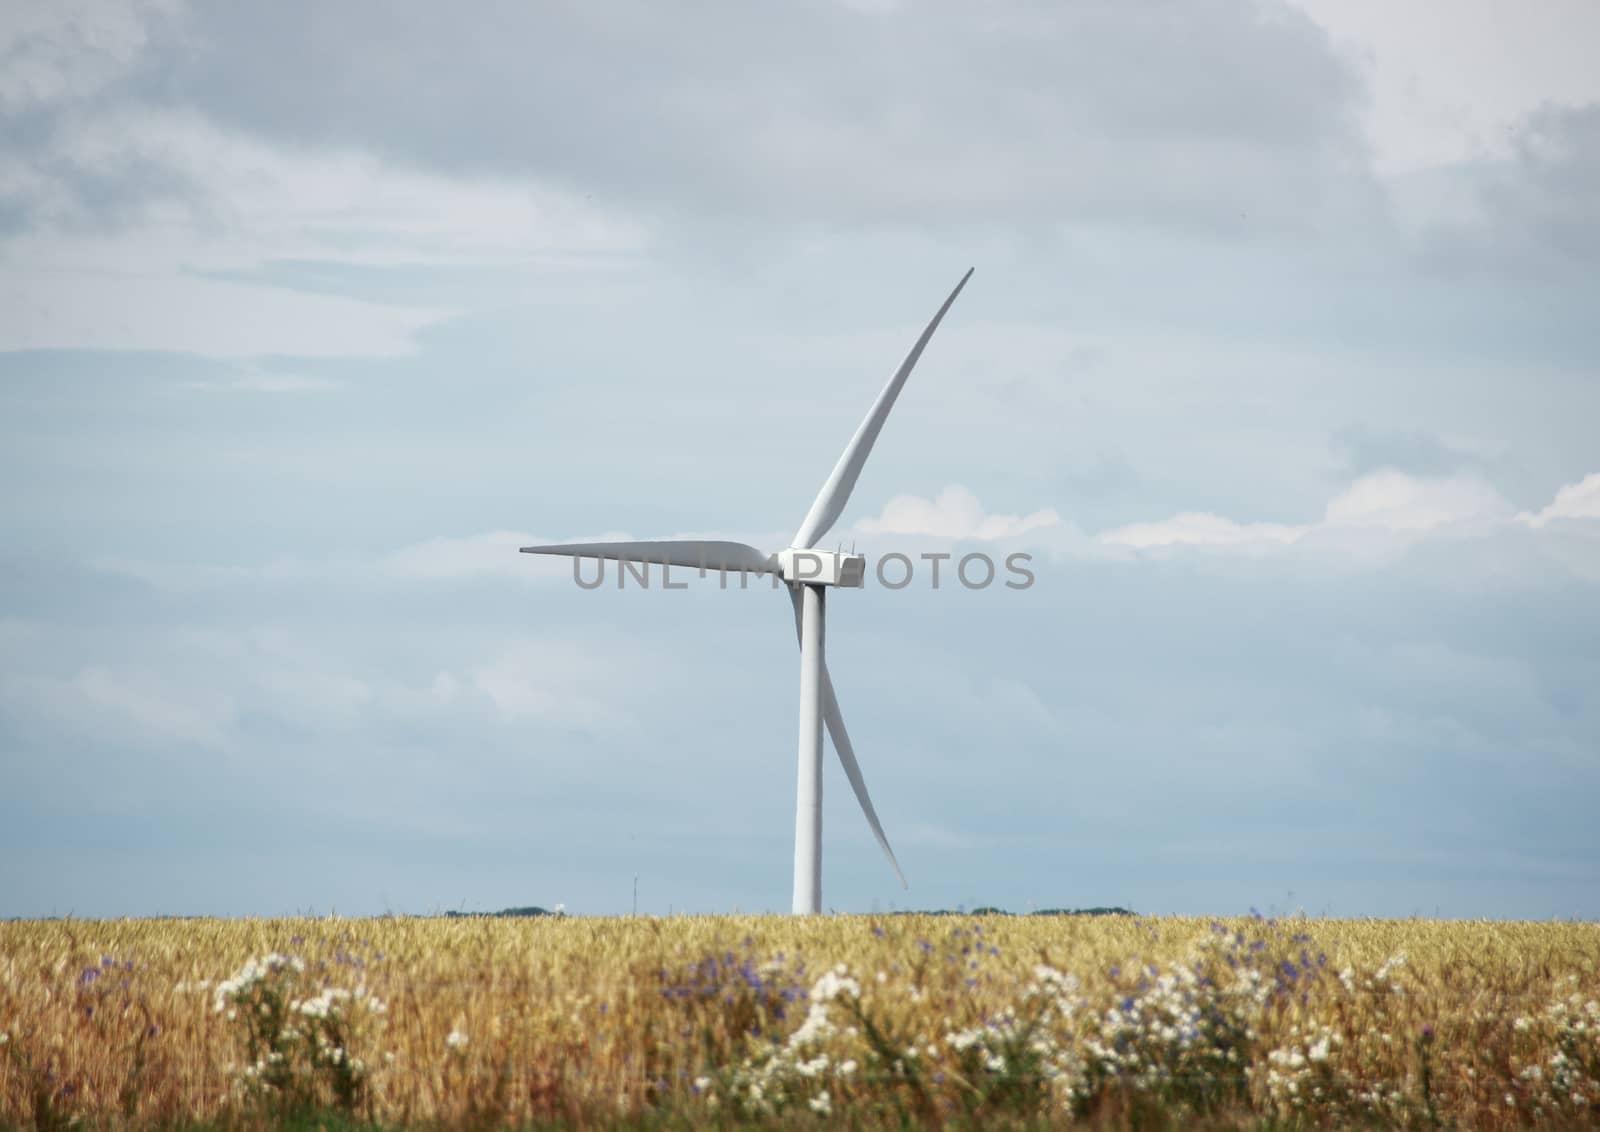 Single windmill in grass field with clouds